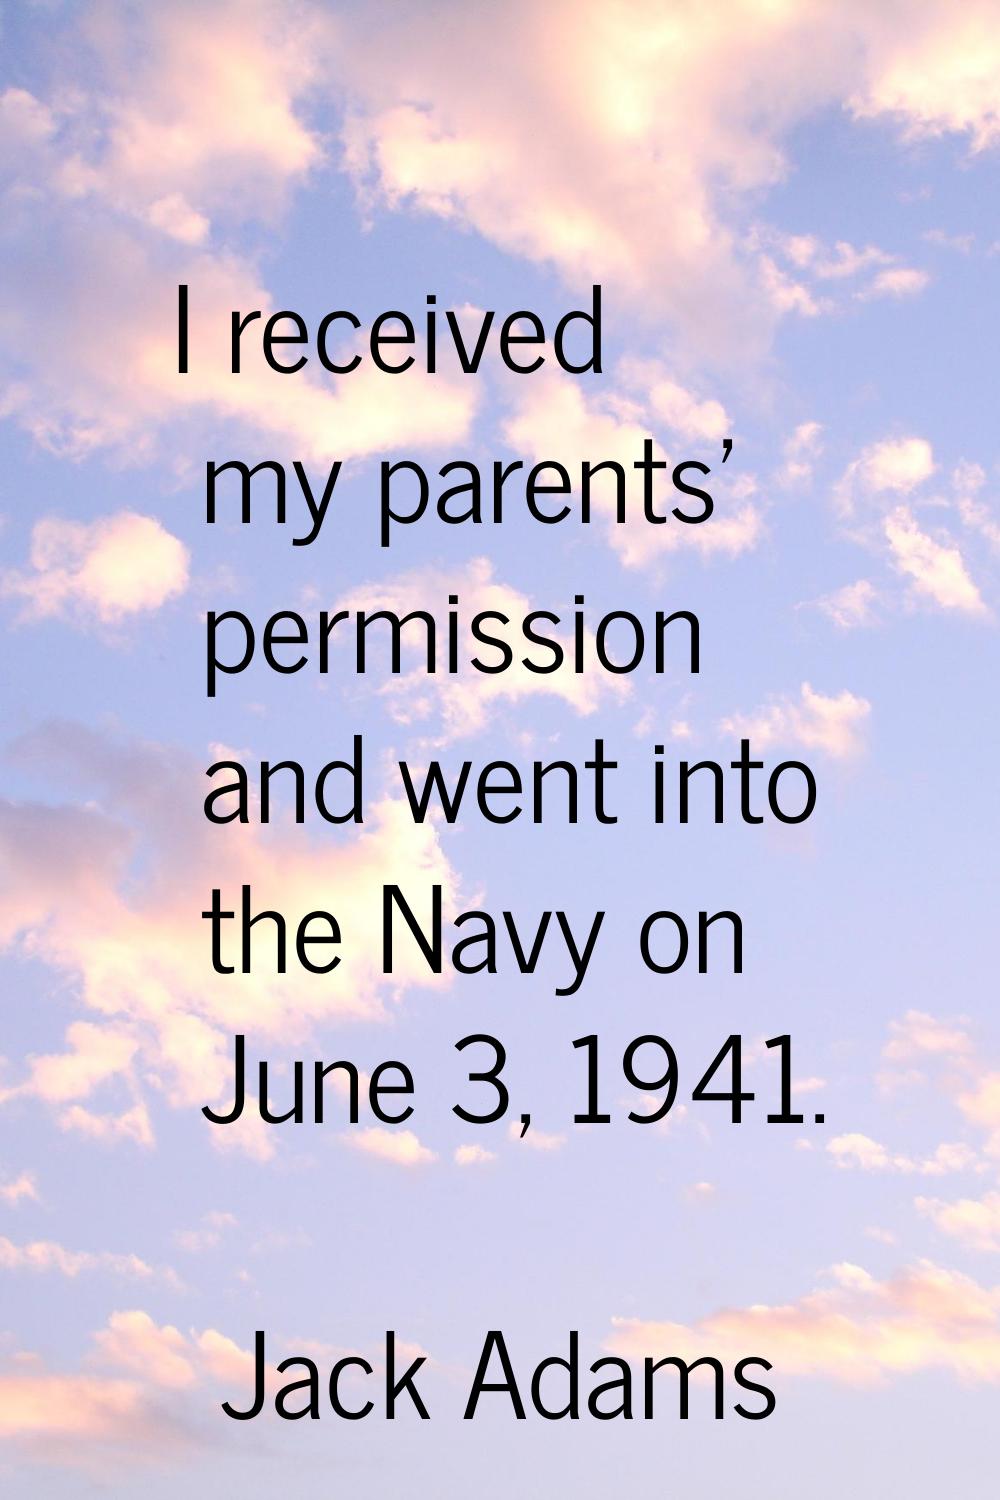 I received my parents' permission and went into the Navy on June 3, 1941.